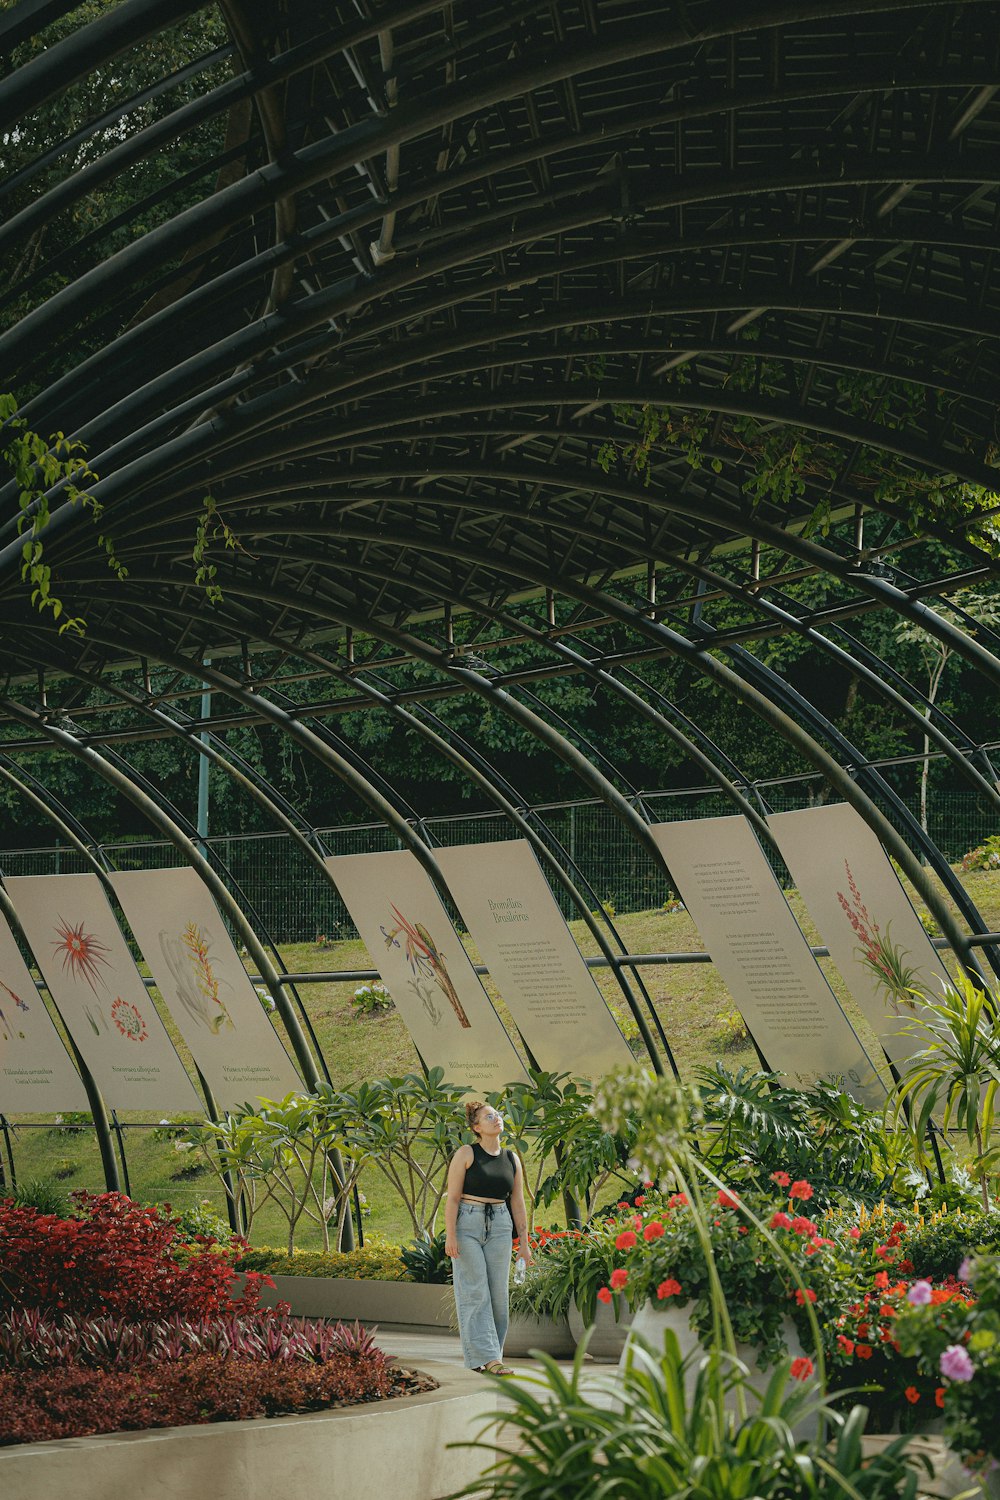 a woman walking through a garden filled with lots of plants